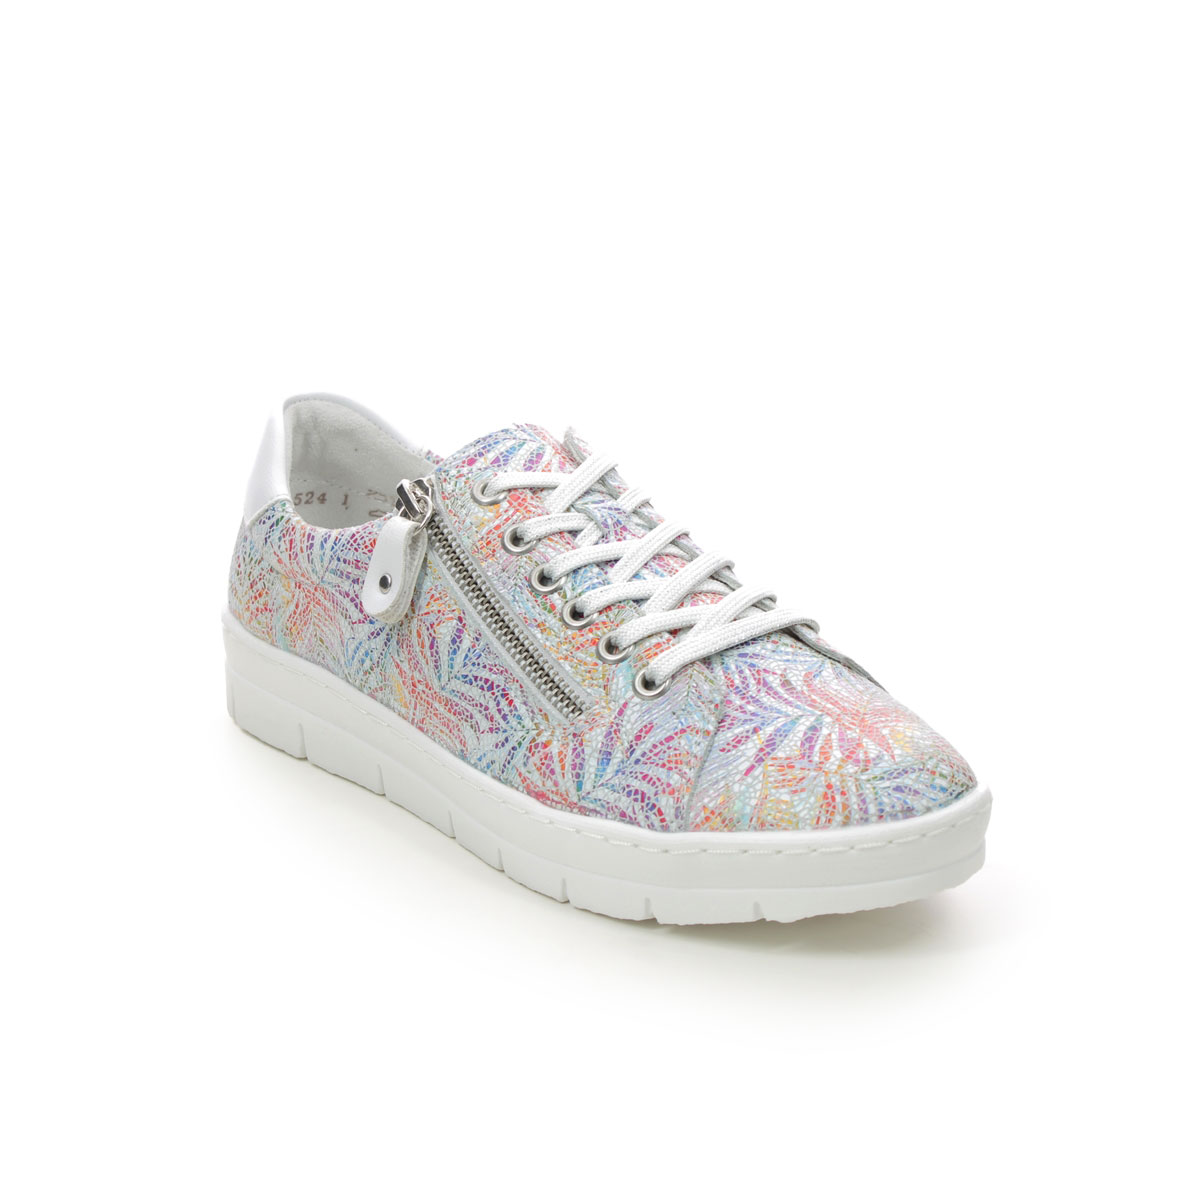 Remonte Ravenna 11 Floral Print Womens Trainers D5800-88 In Size 37 In Plain Floral Print